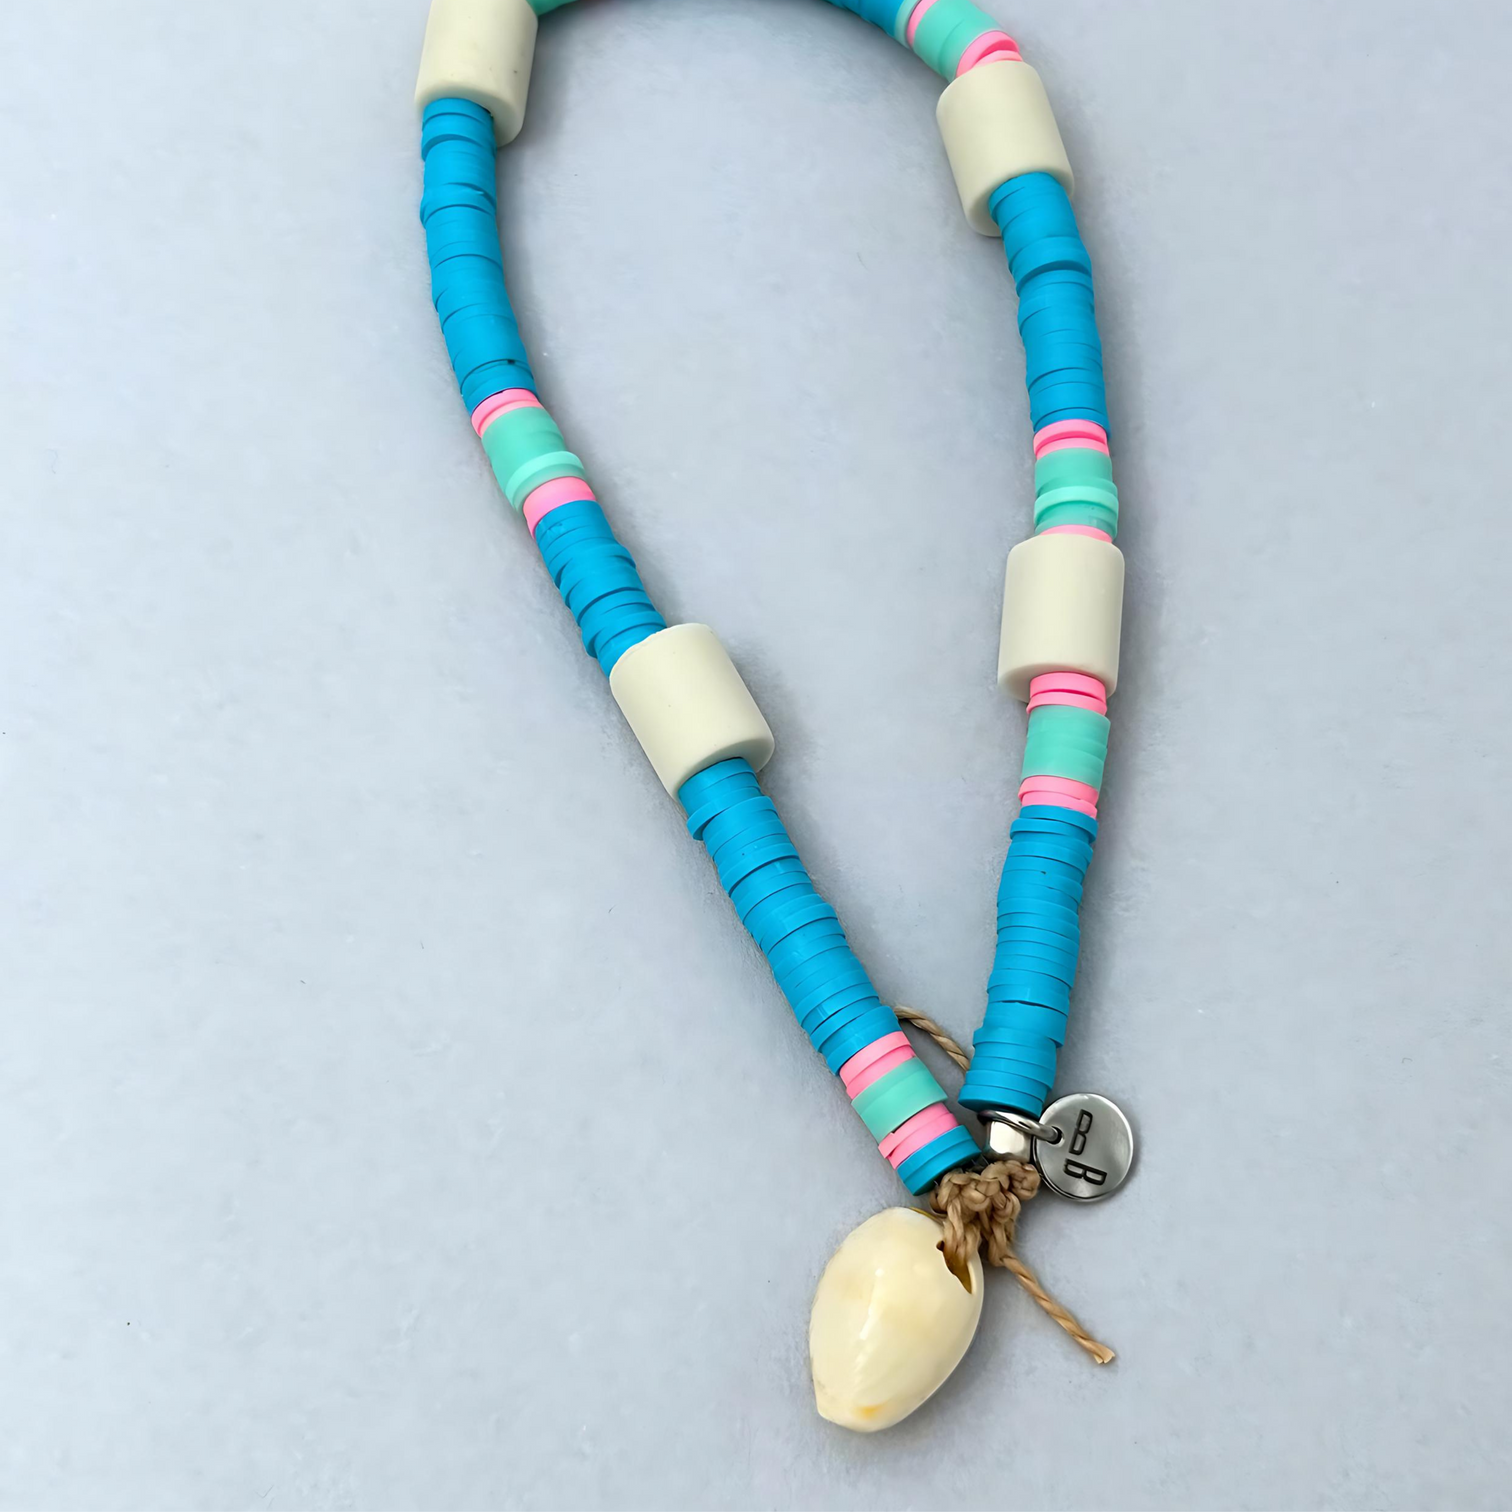 The cool surfer's look anti-tick dog necklace in Galaxiy Blue_wow by Le BijouBijou. Details shot